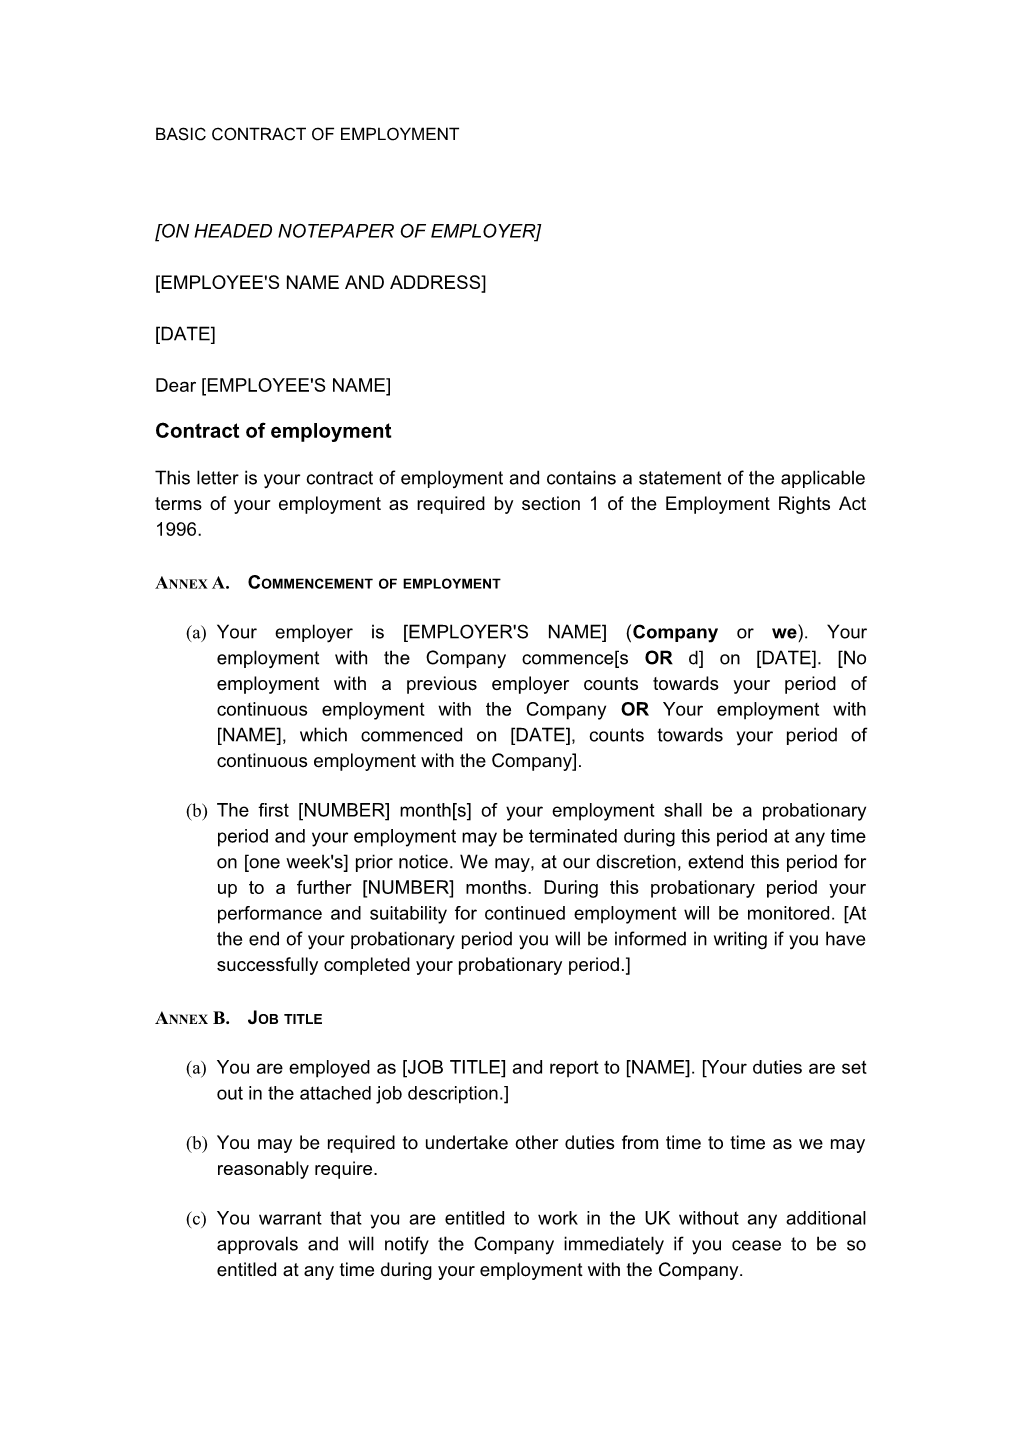 Employment Contract for a Junior Employee